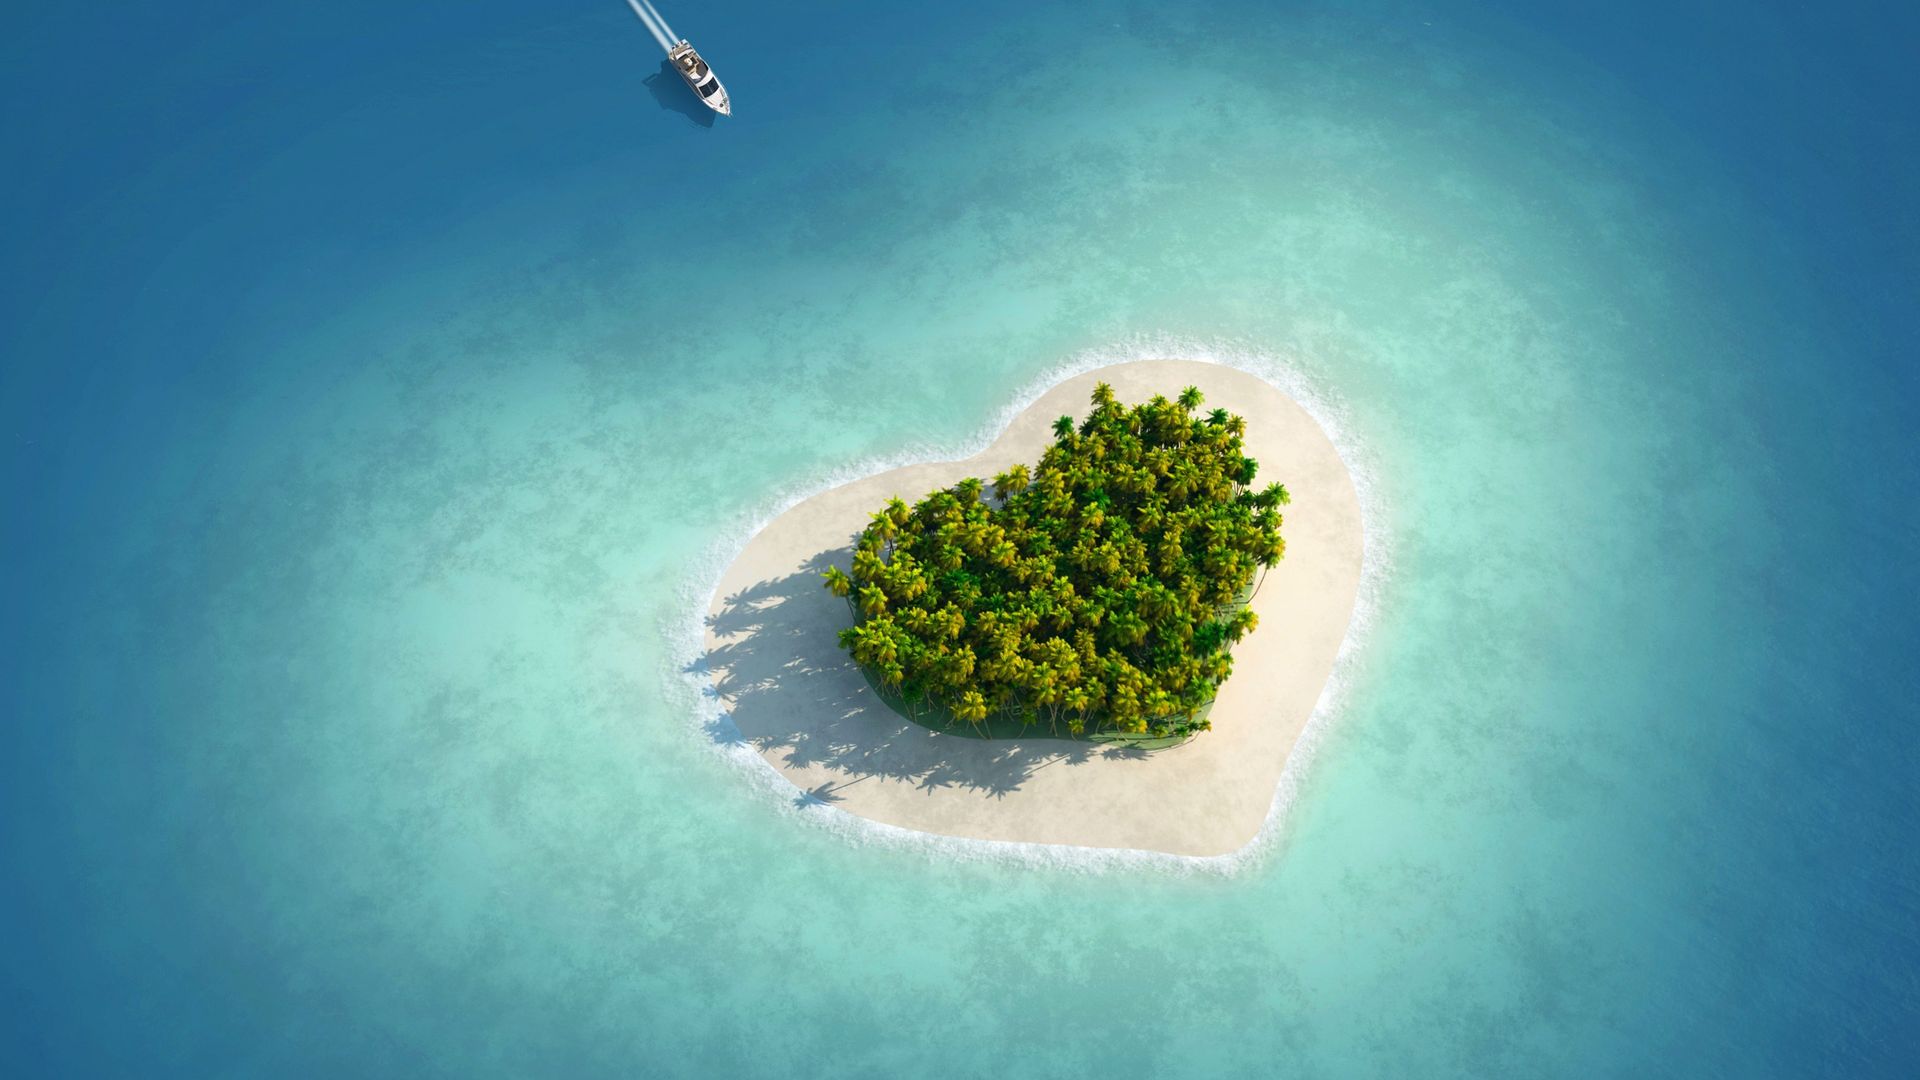 Free Hd Wallpapers For Android - Love Island Hd - HD Wallpaper 